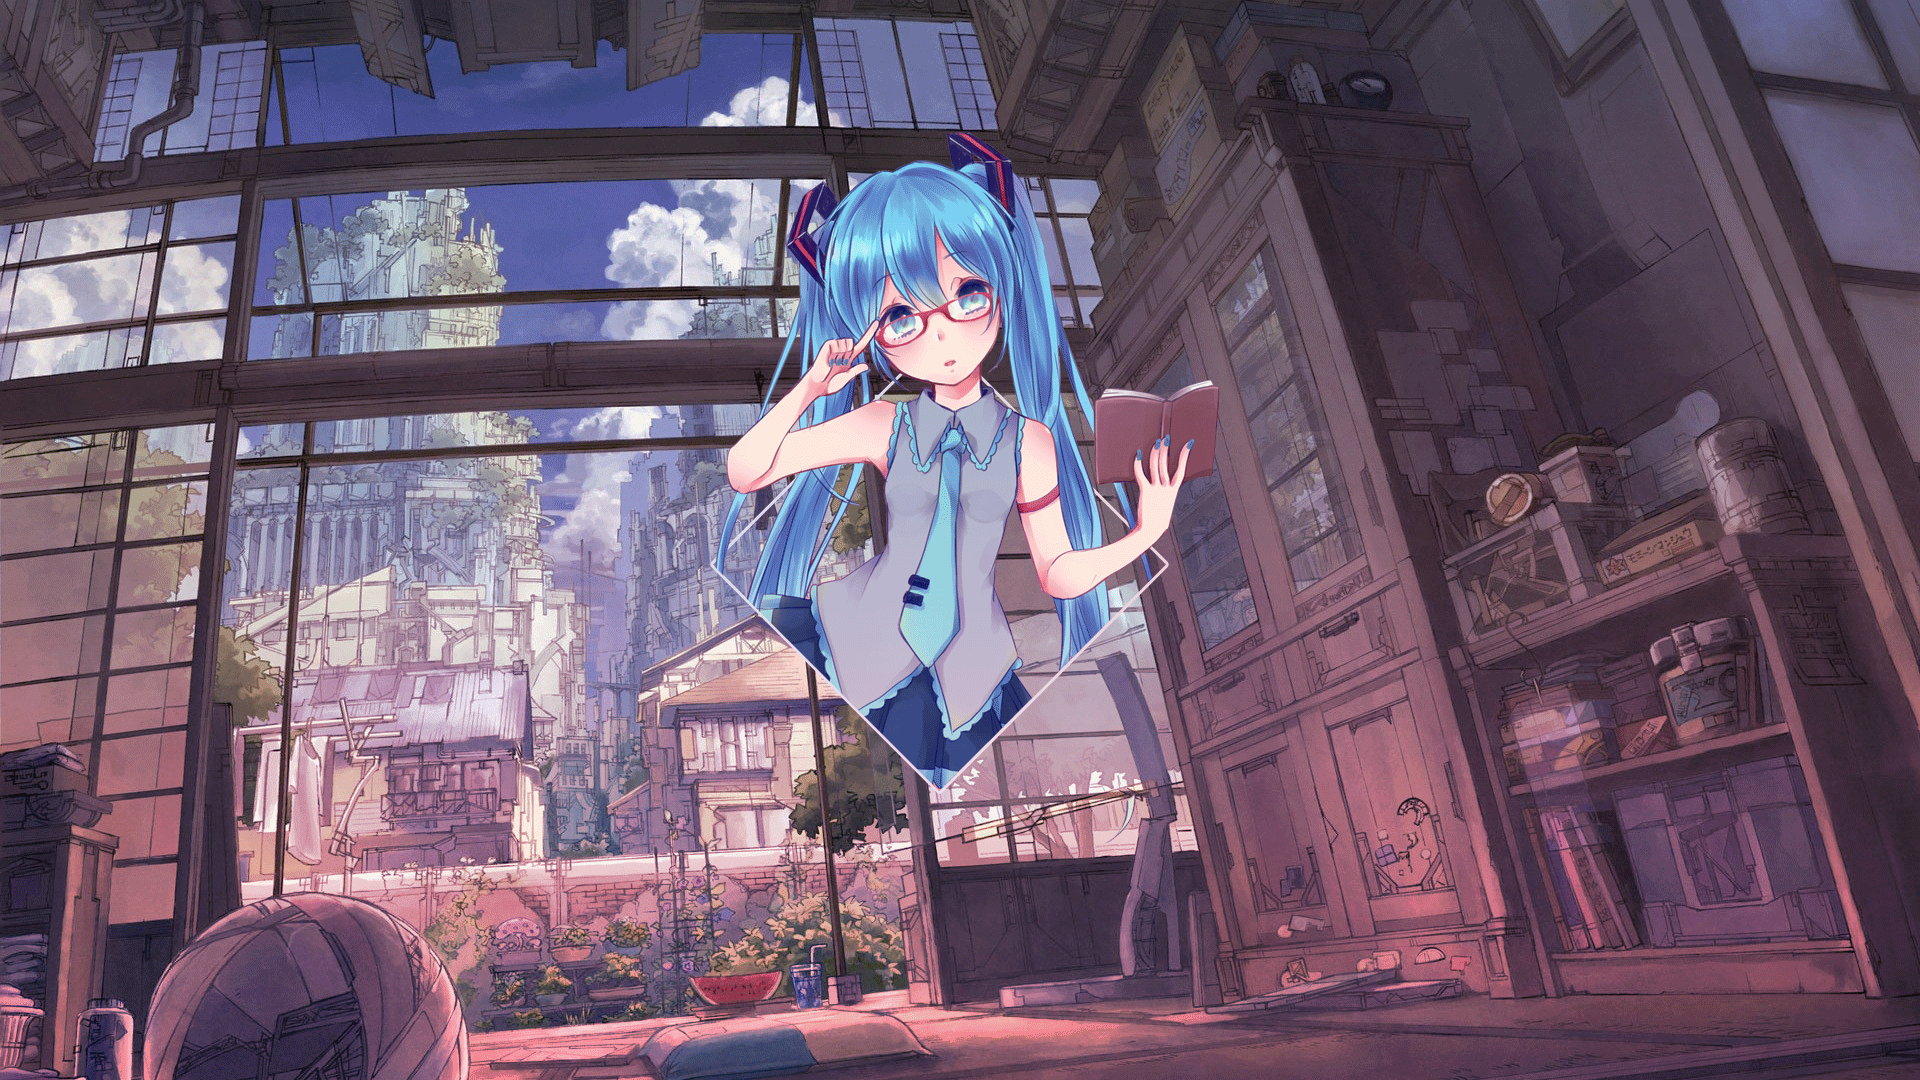 Anime 1920x1080 anime anime girls Hatsune Miku Vocaloid digital art picture-in-picture